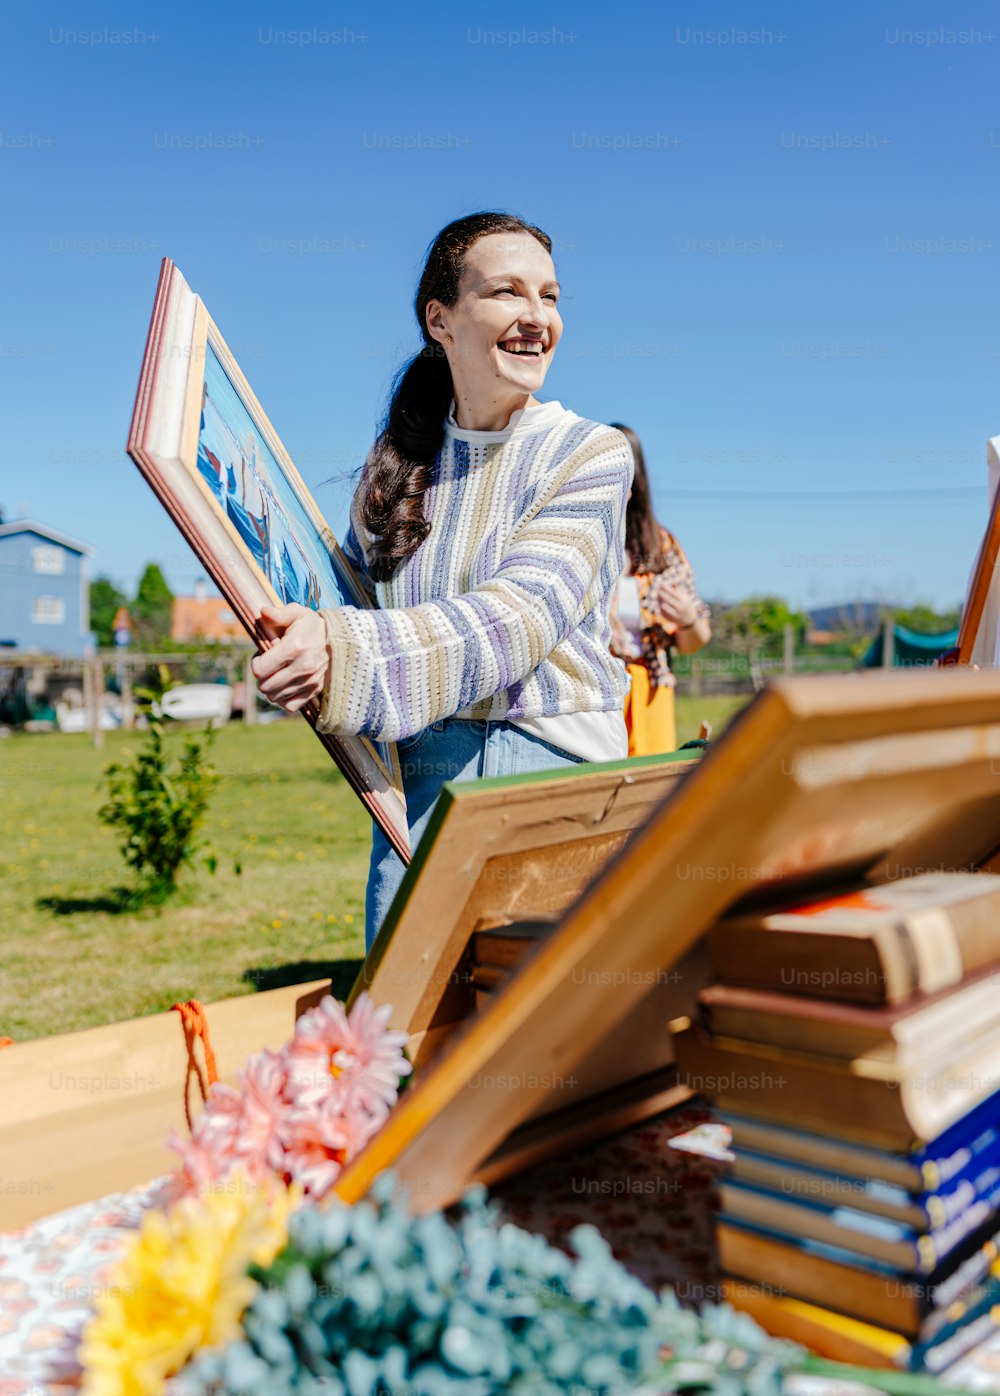 a woman holding up a picture frame in front of a pile of books